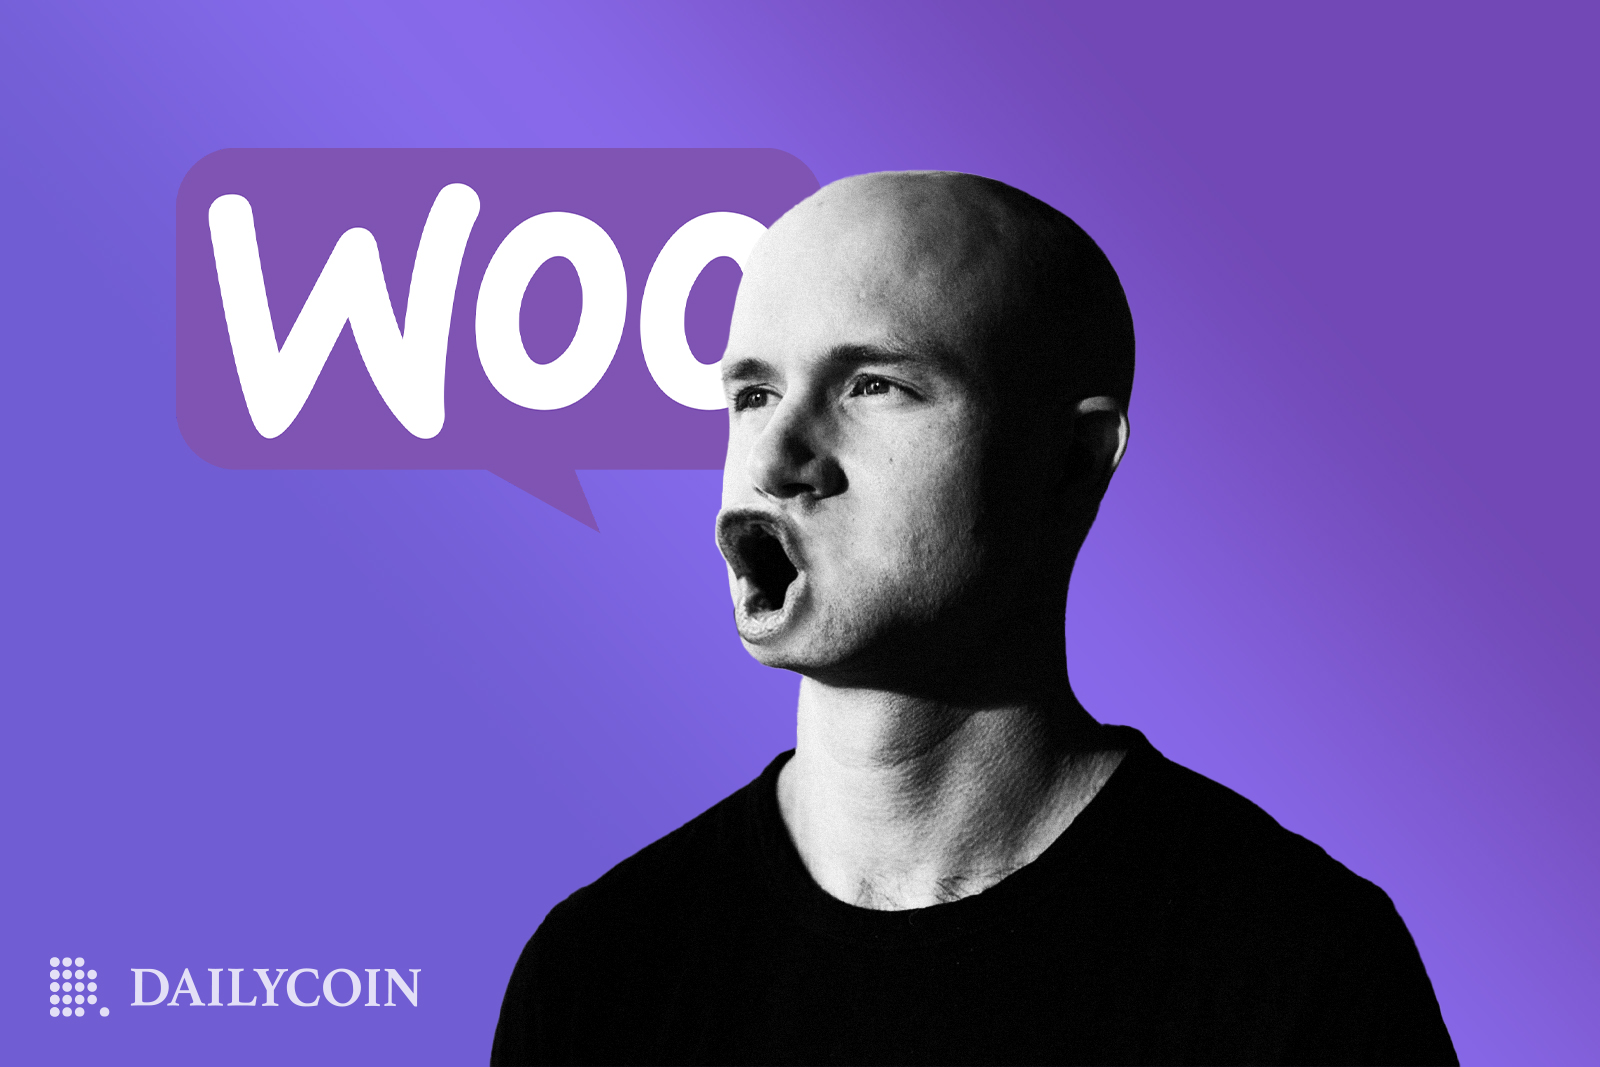 Brian Armstrong open mouth speech bubble above saying Woo